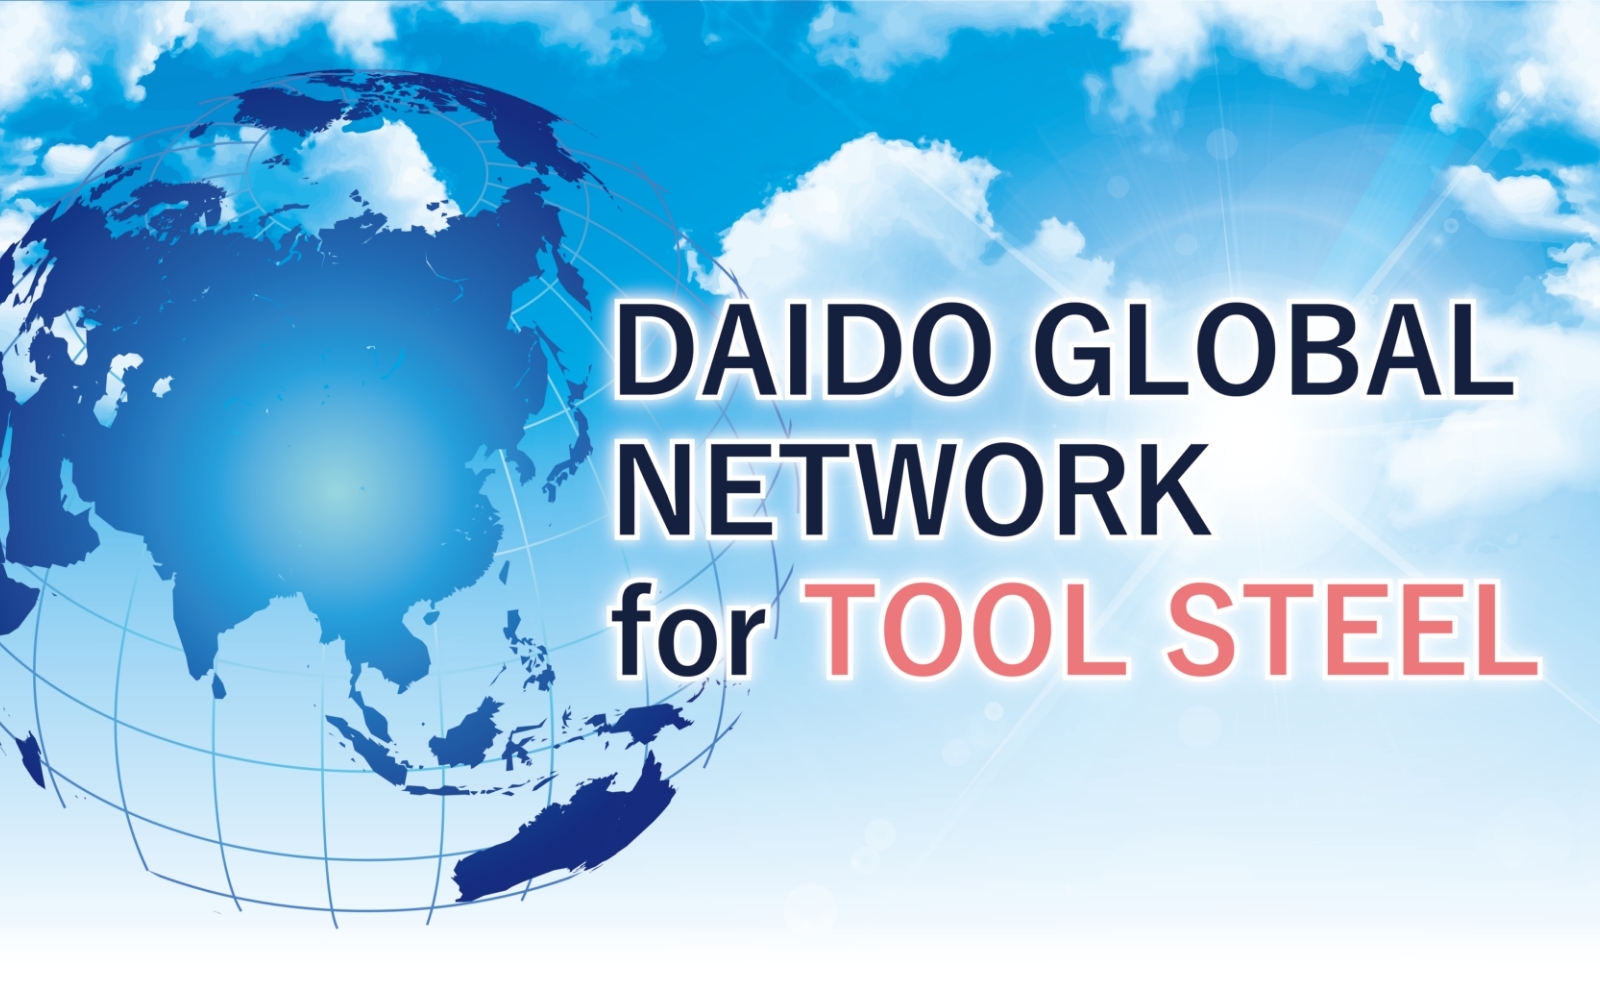 DAIDO GLOBAL NETWORK for TOOL STEEL